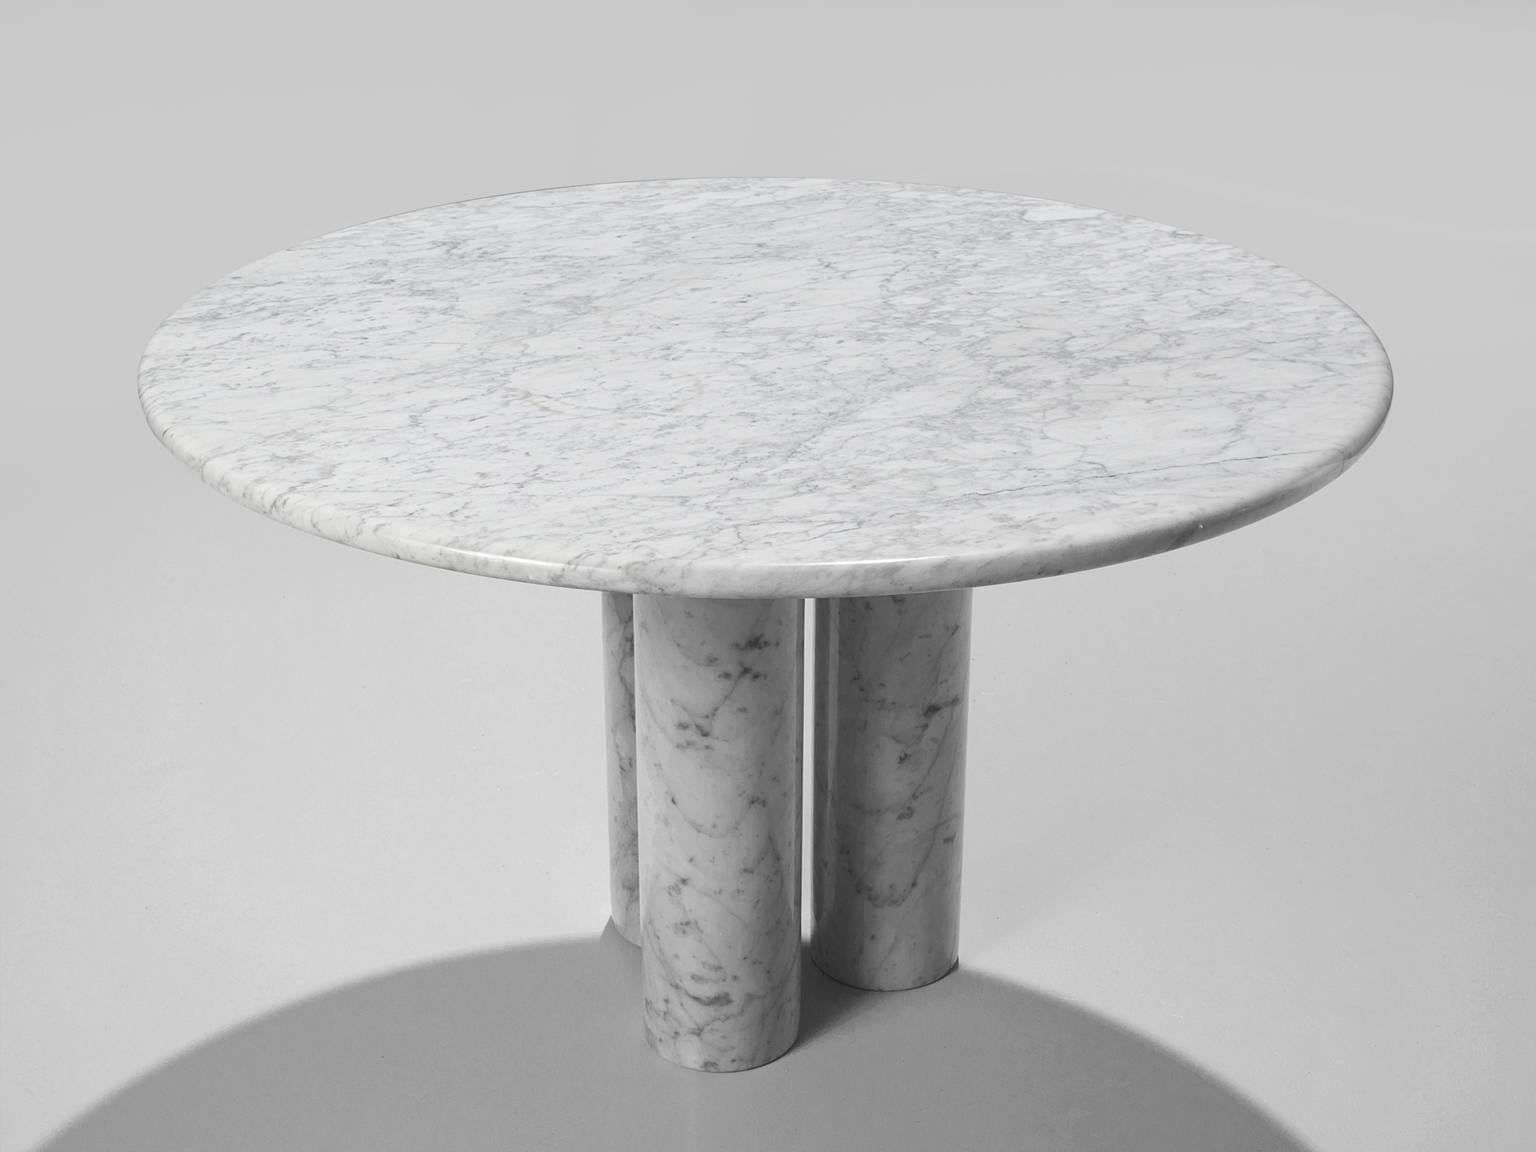 Breakfast table, marble, Italy, 1970s. 

This architectural table is a skillful example of postmodern design. The circular table features no joints or clamps and is architectural in its structure. The table rests on the three column-like legs. The